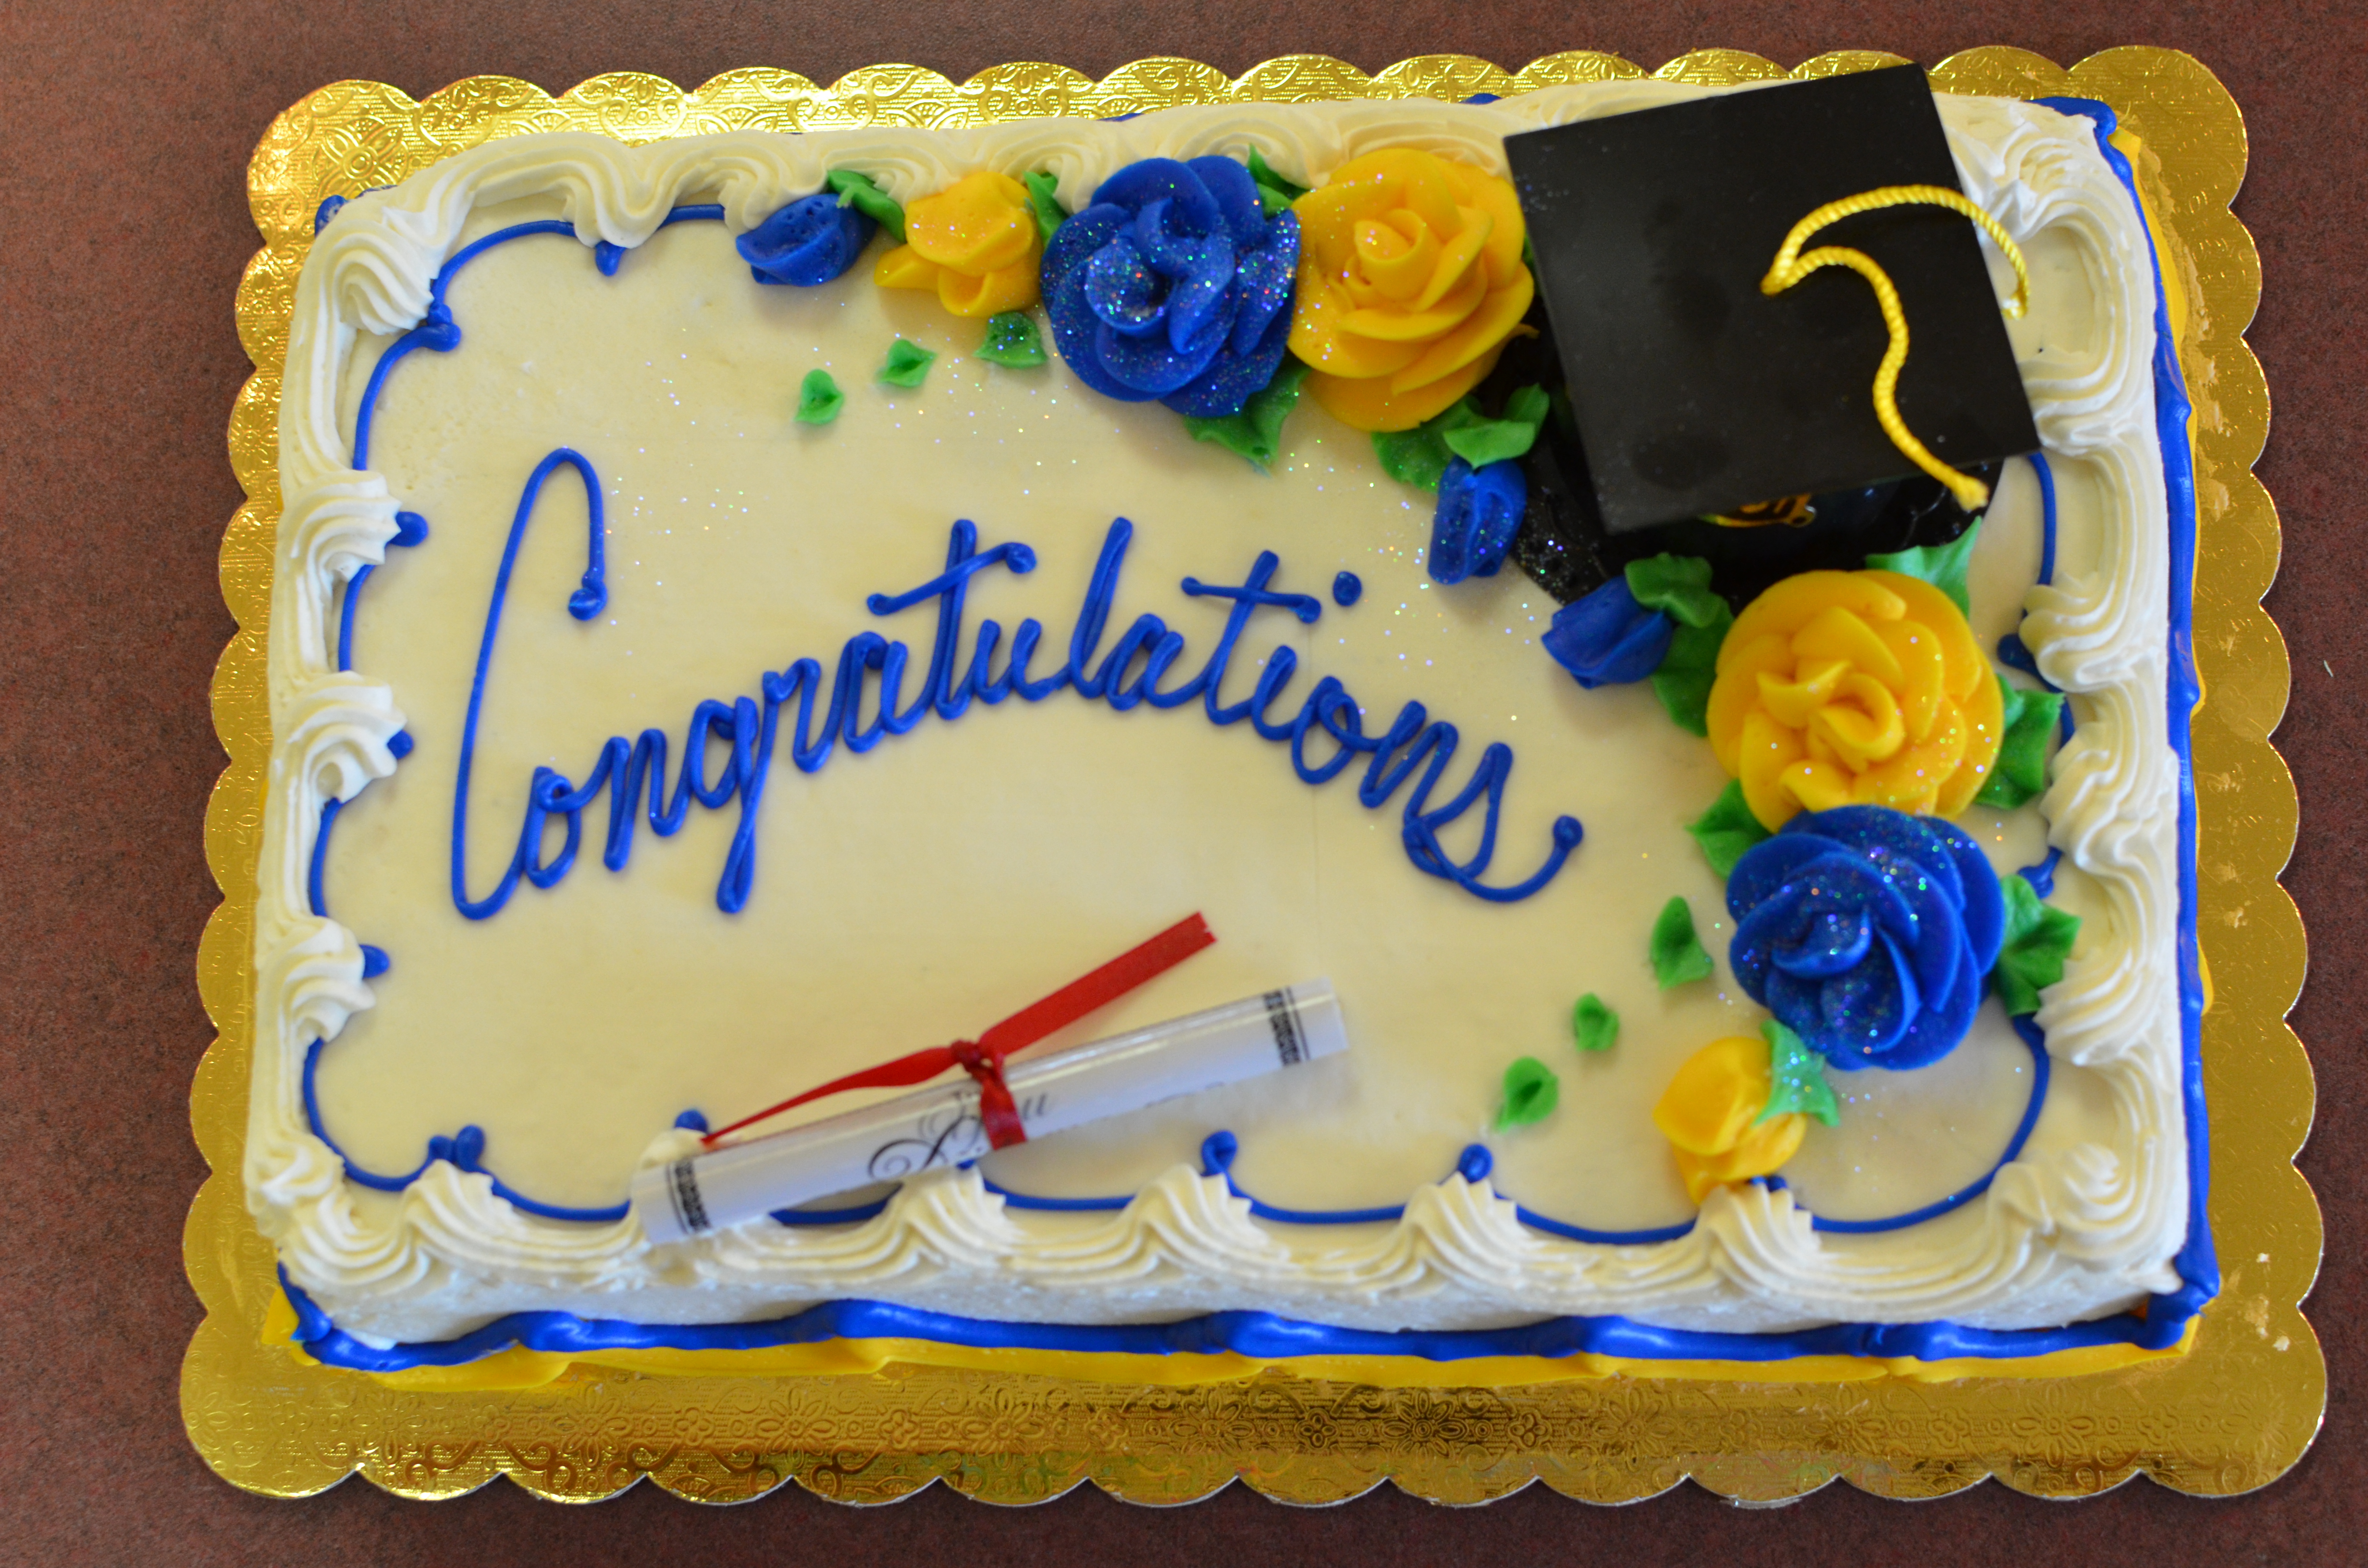 10 Best Of 2013 Graduation Cakes Photo - Birthday Cake for Uncle Mike ...